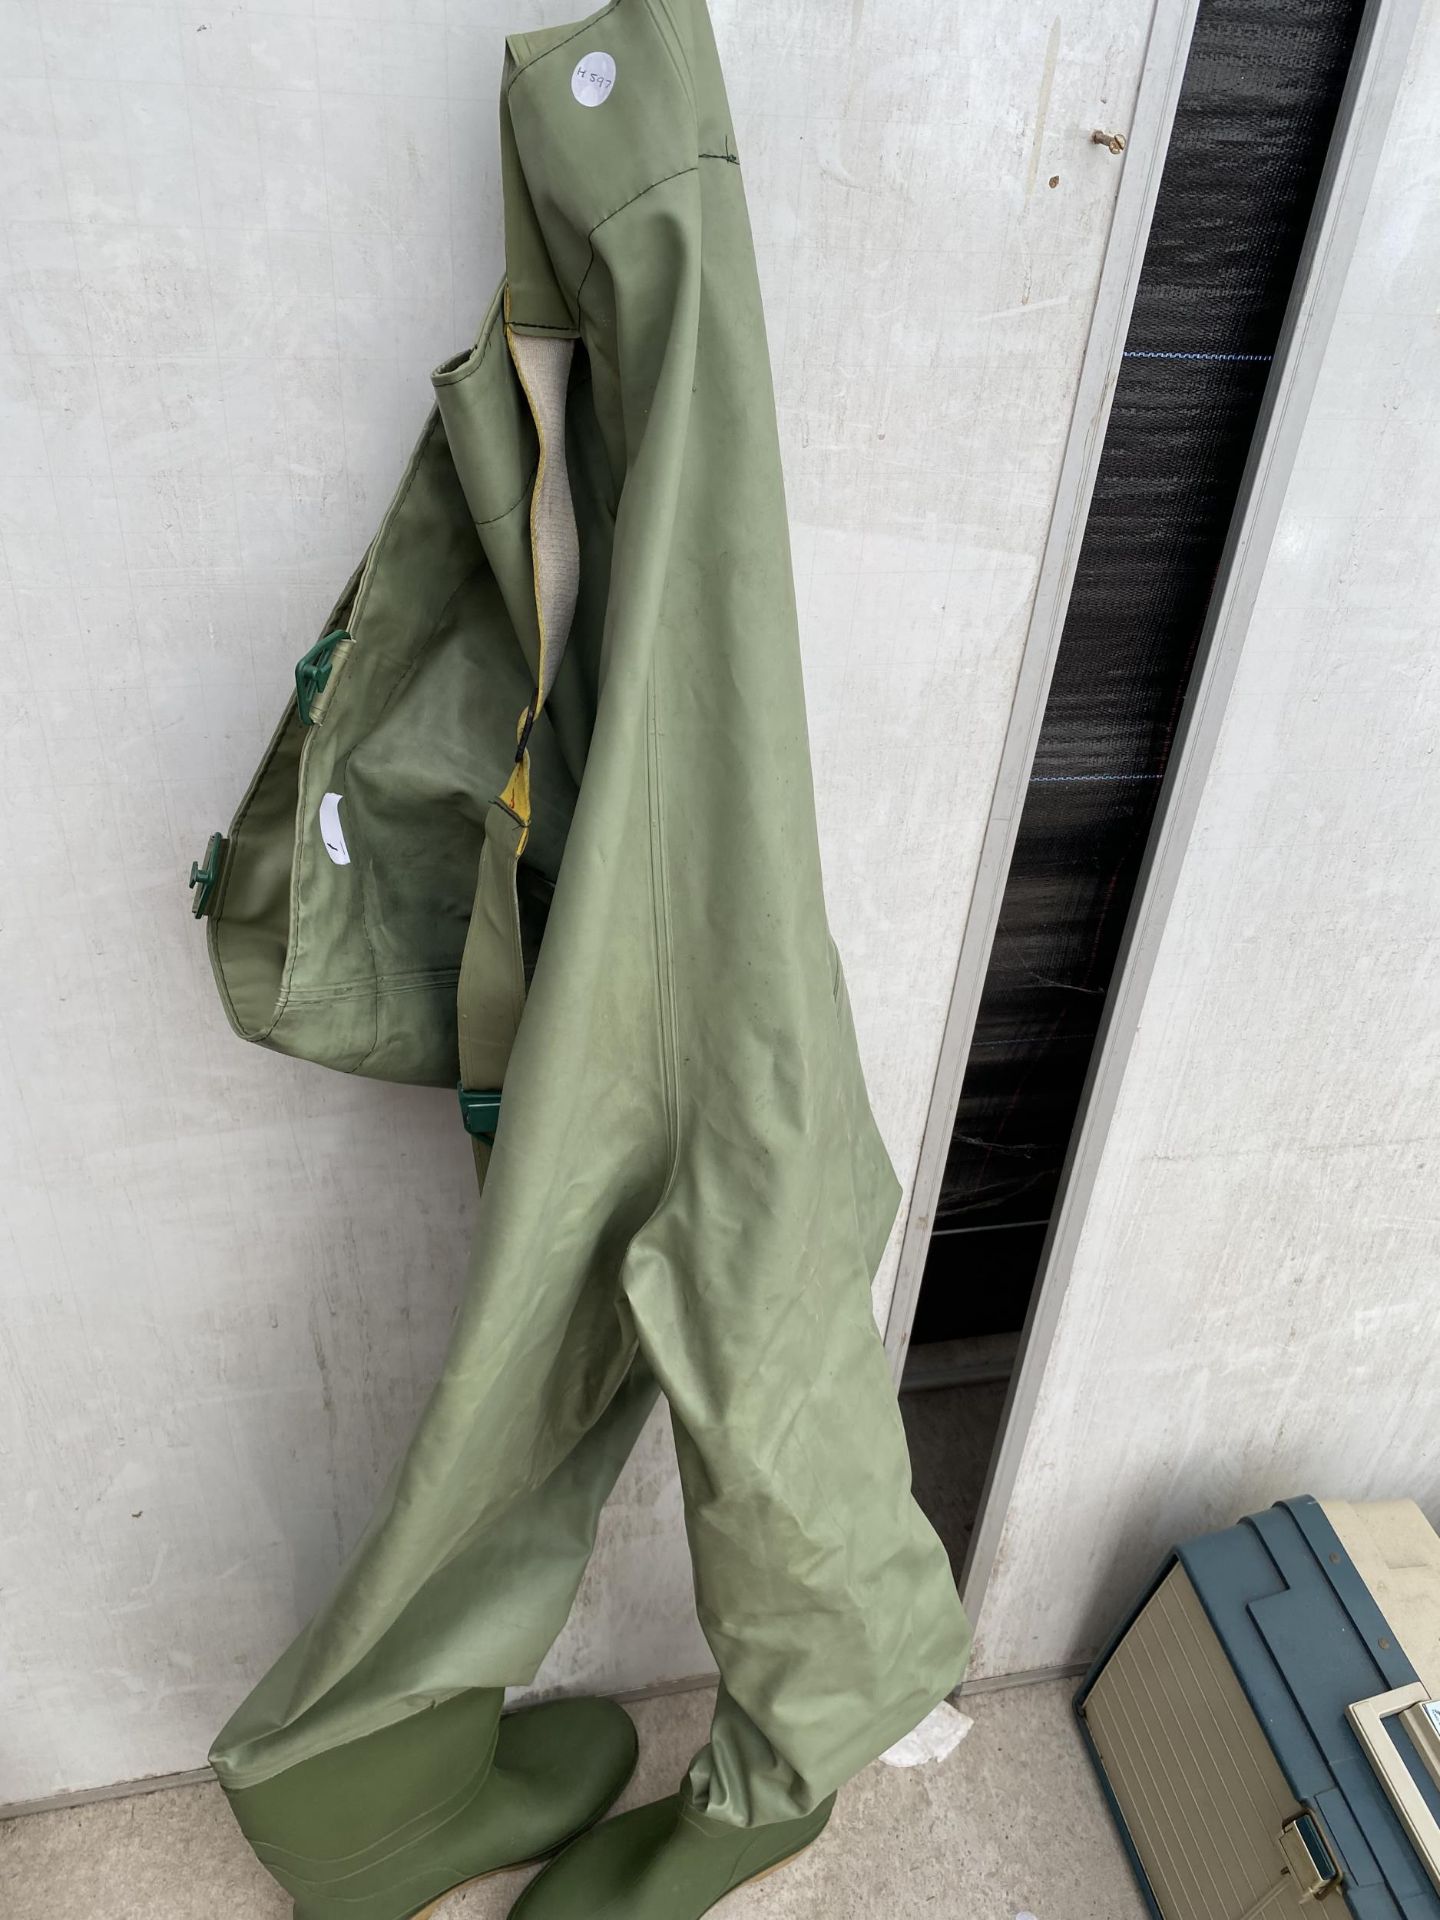 A PAIR OF SIZE 11 OCEAN FISHING CHEST WADERS - Image 3 of 4